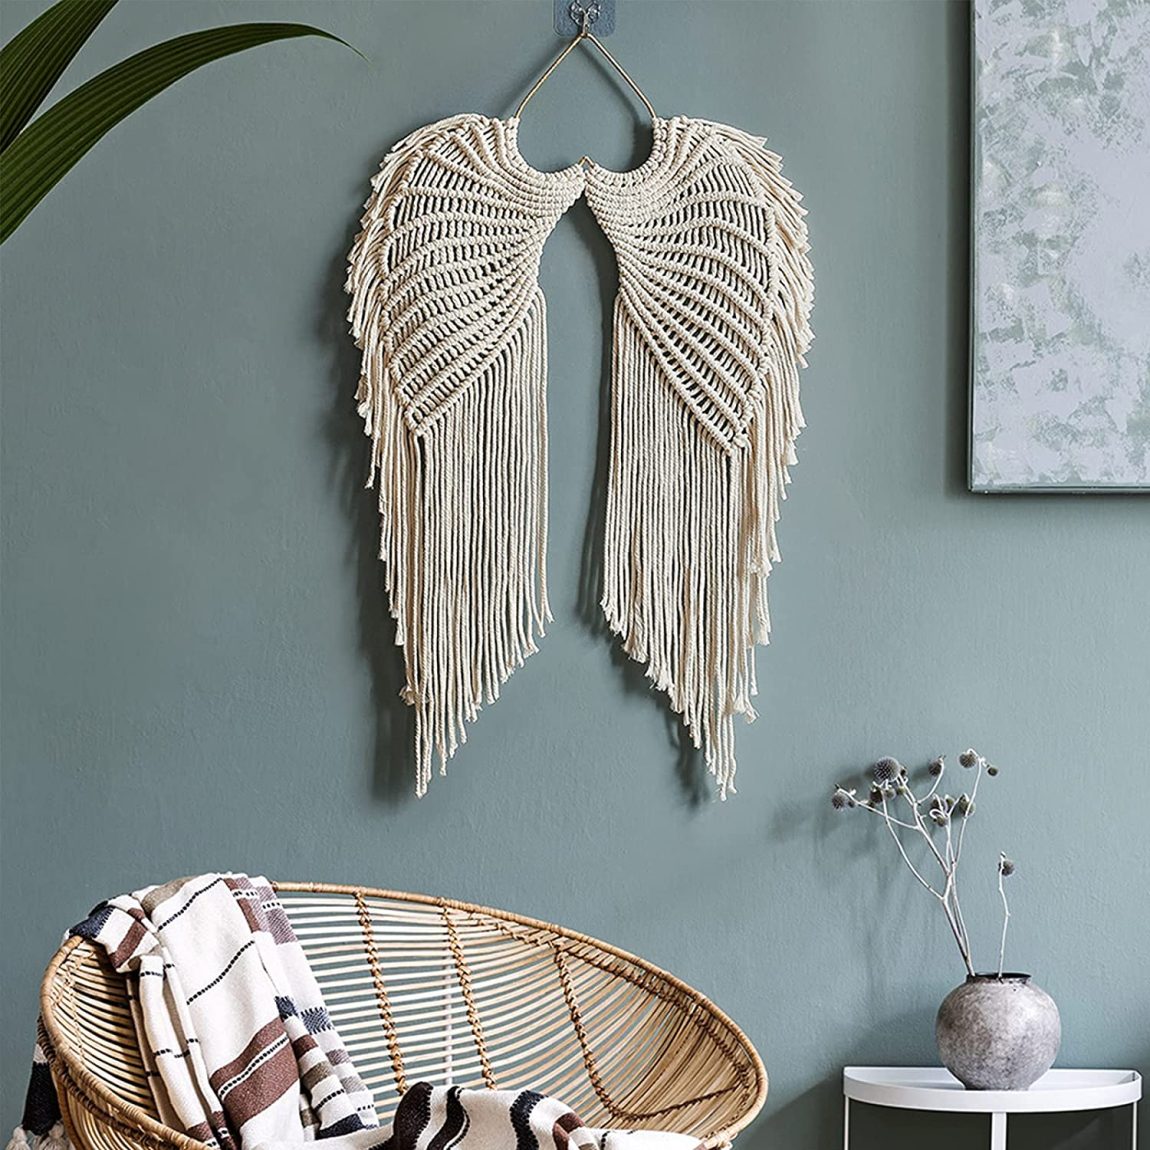 Macrame Wall Hangings: Adding a Touch of Nature to Your Urban Oasis